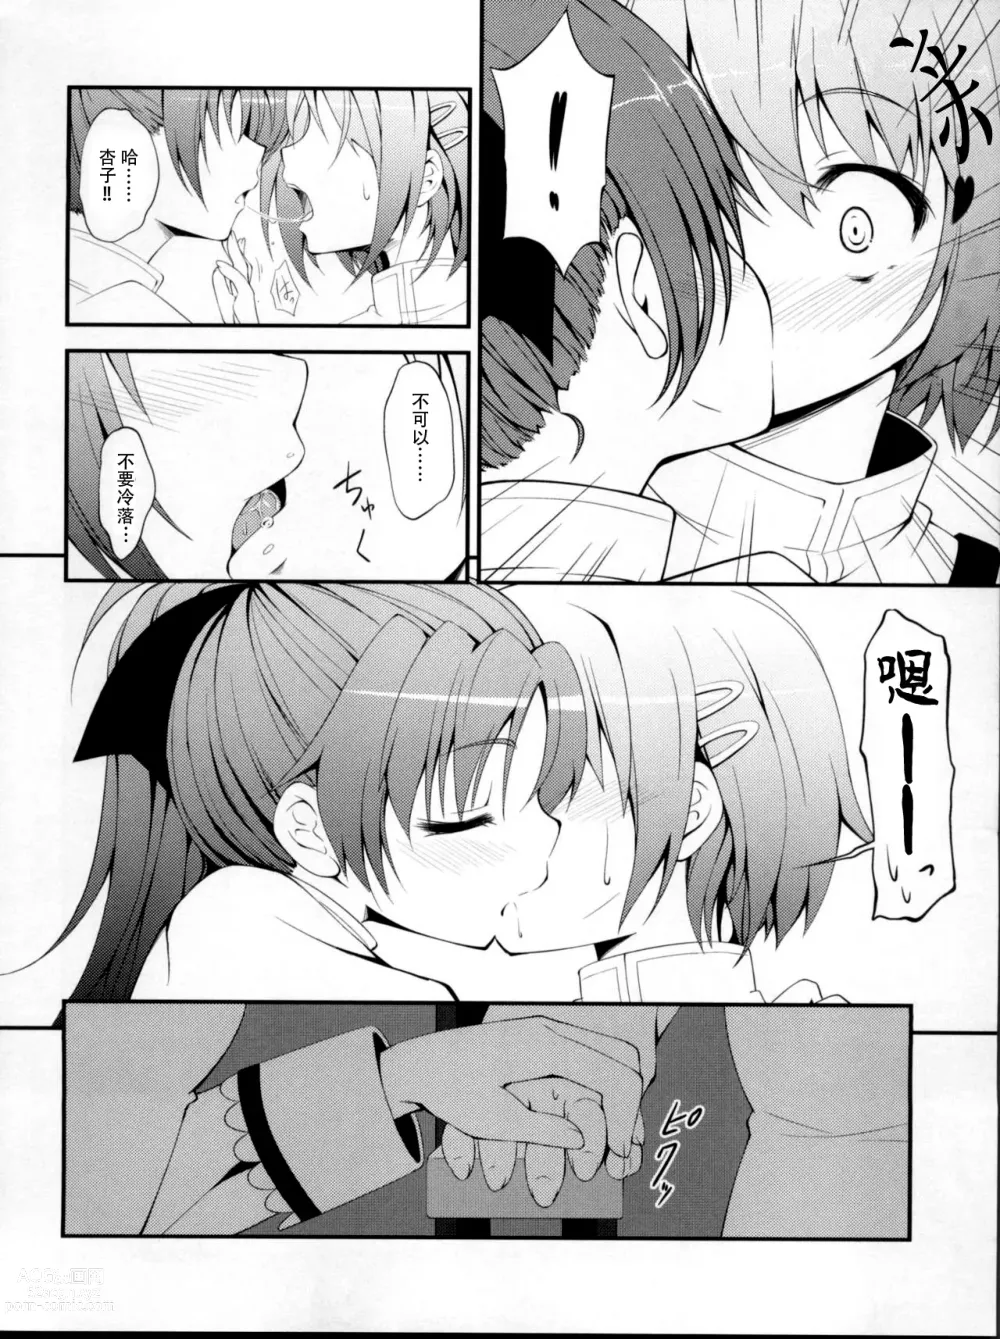 Page 7 of doujinshi Lovely Girls Lily vol. 2